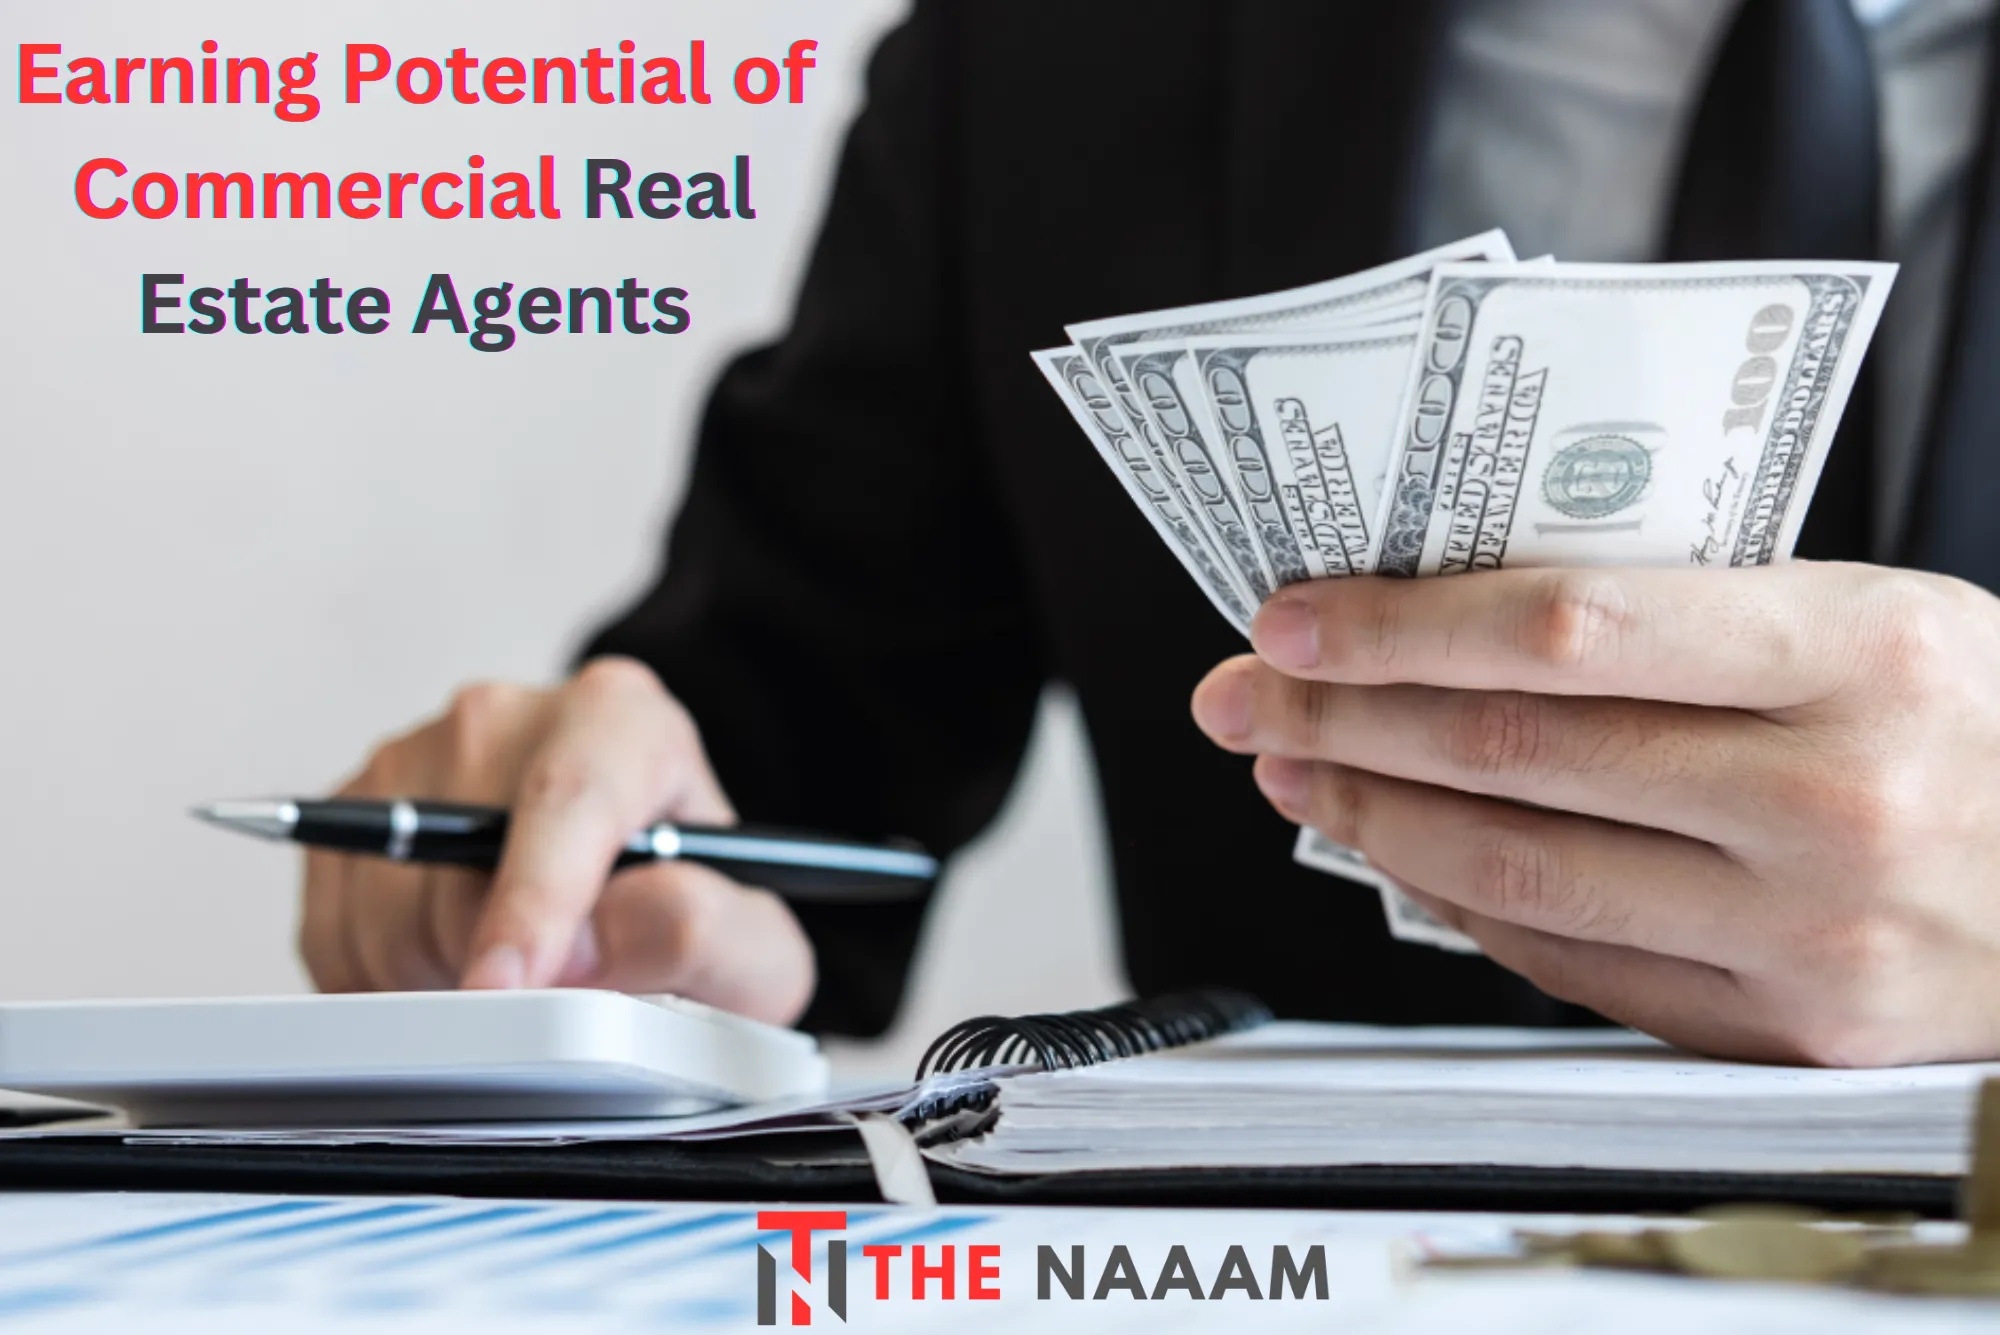 Earning Potential of Commercial Real Estate Agents